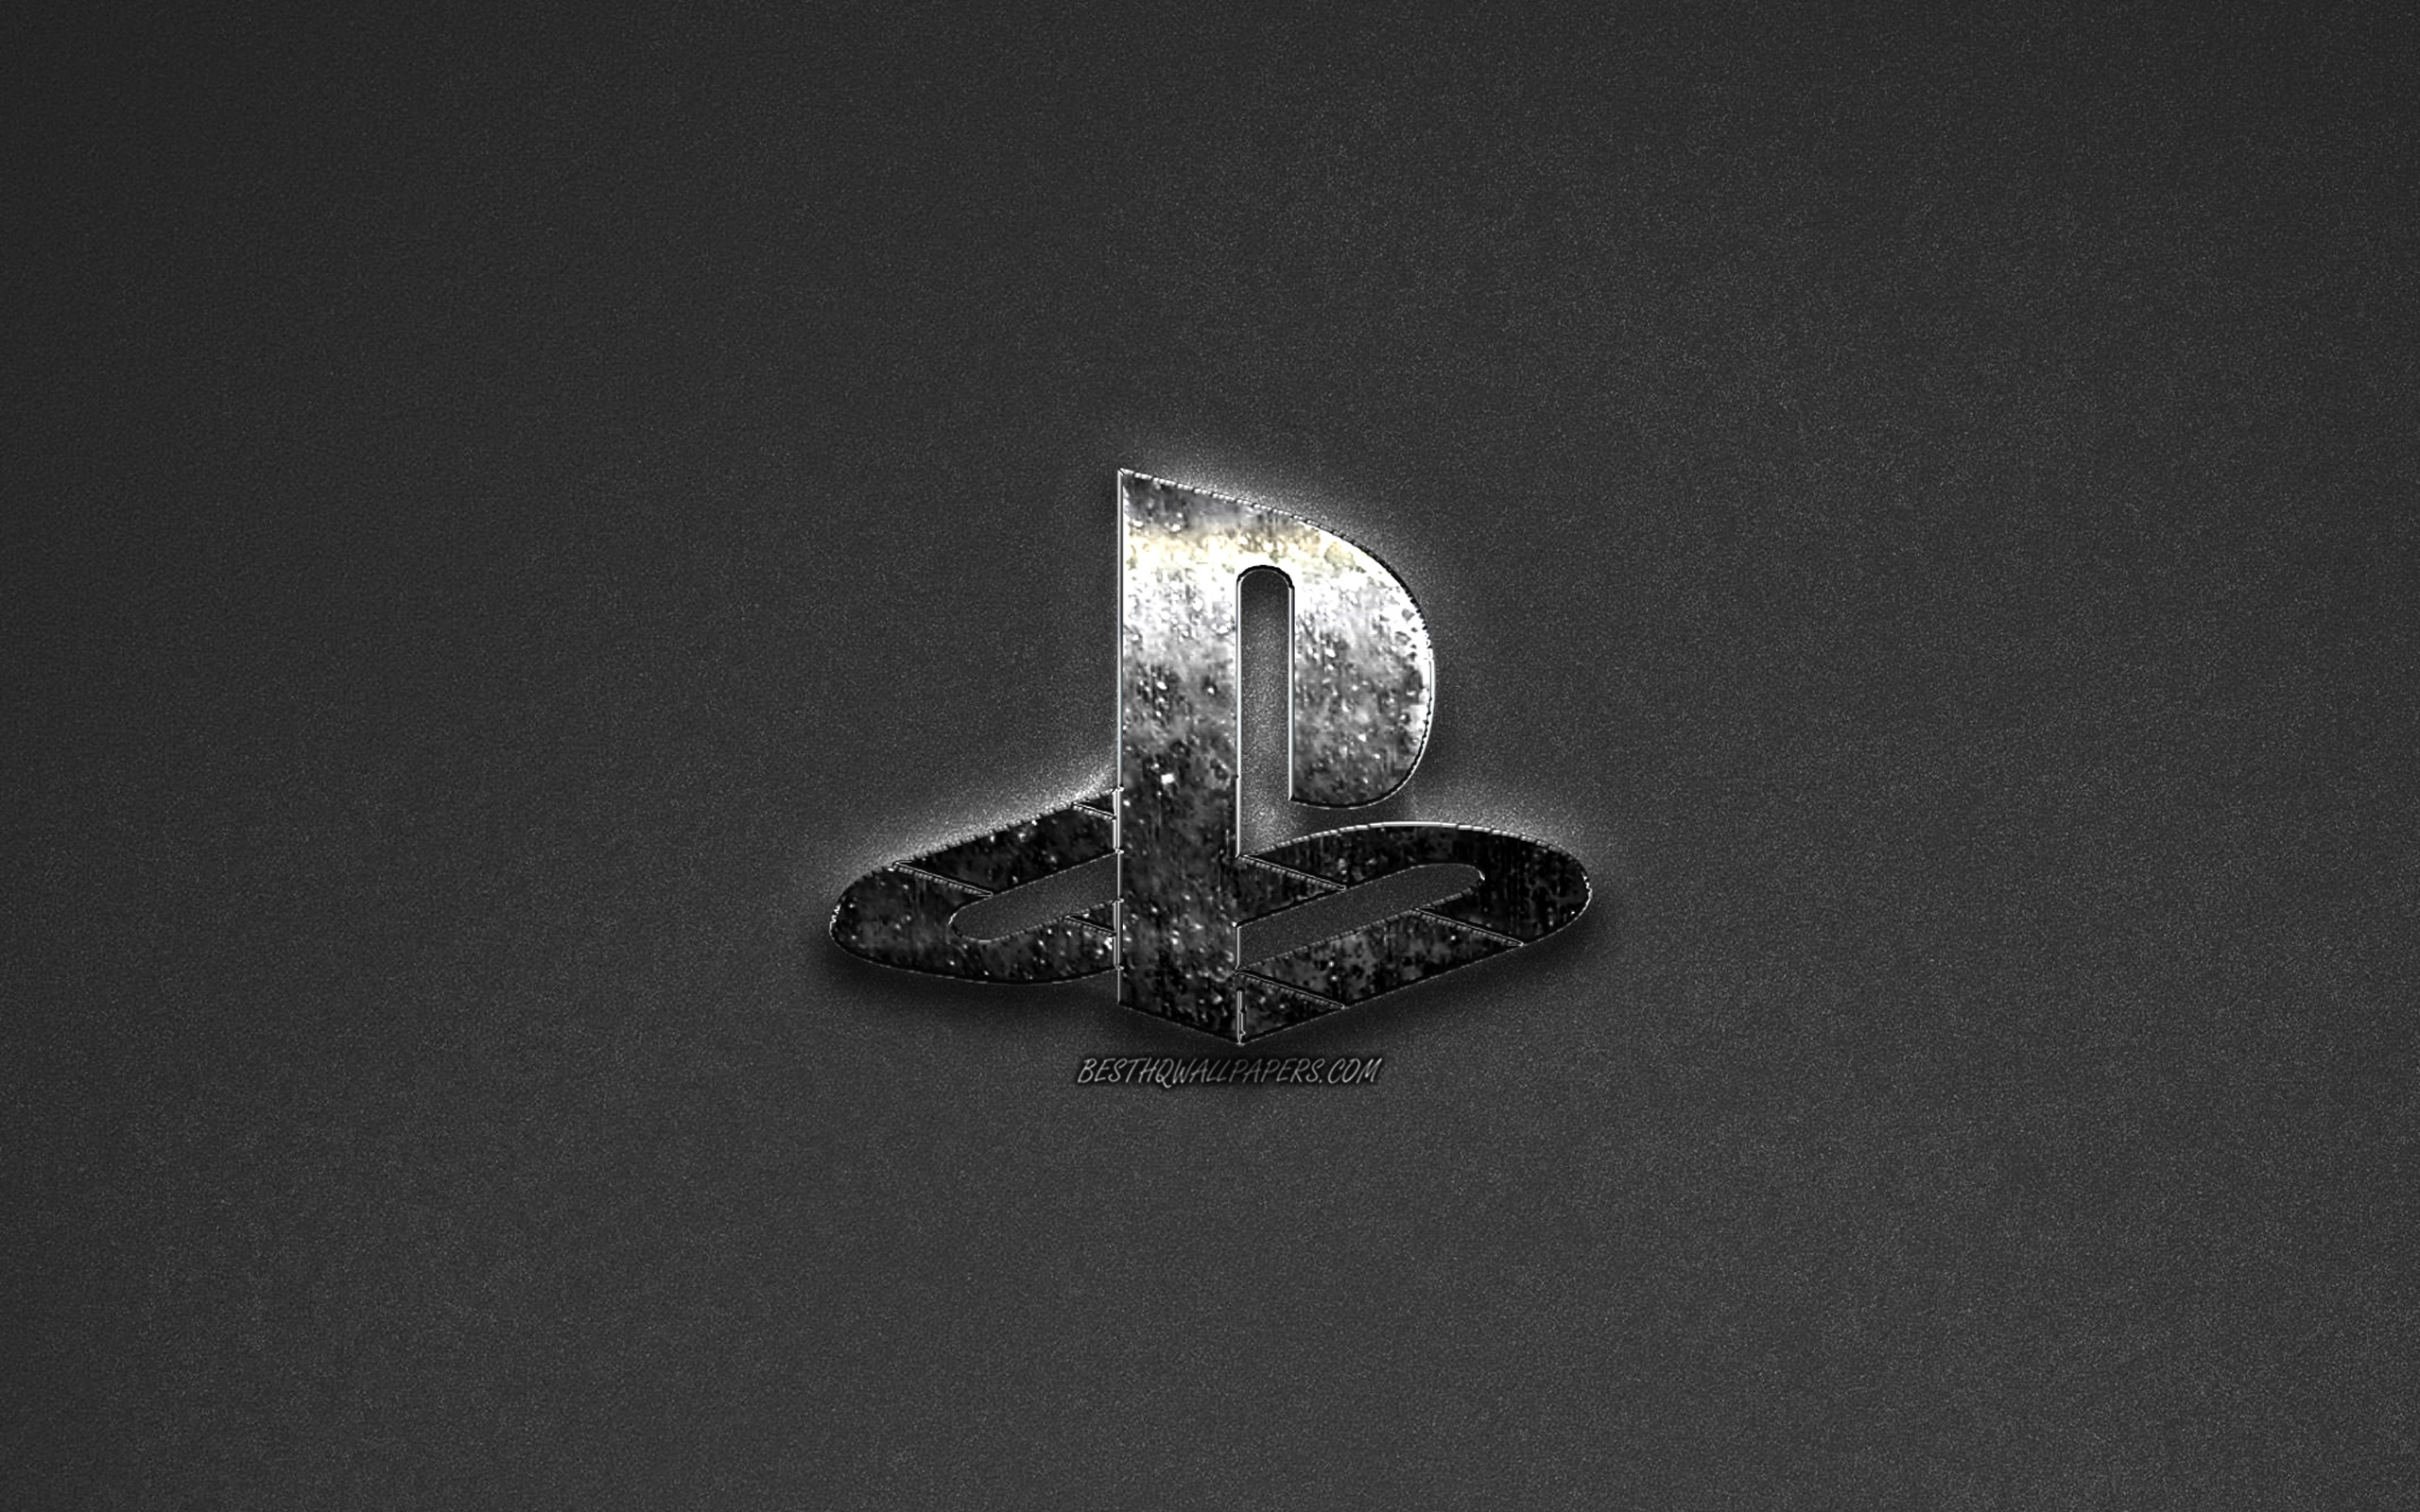 Download wallpaper PS PlayStation logo, metallic logo, gray background, PlayStation 4 logo for desktop with resolution 2560x1600. High Quality HD picture wallpaper